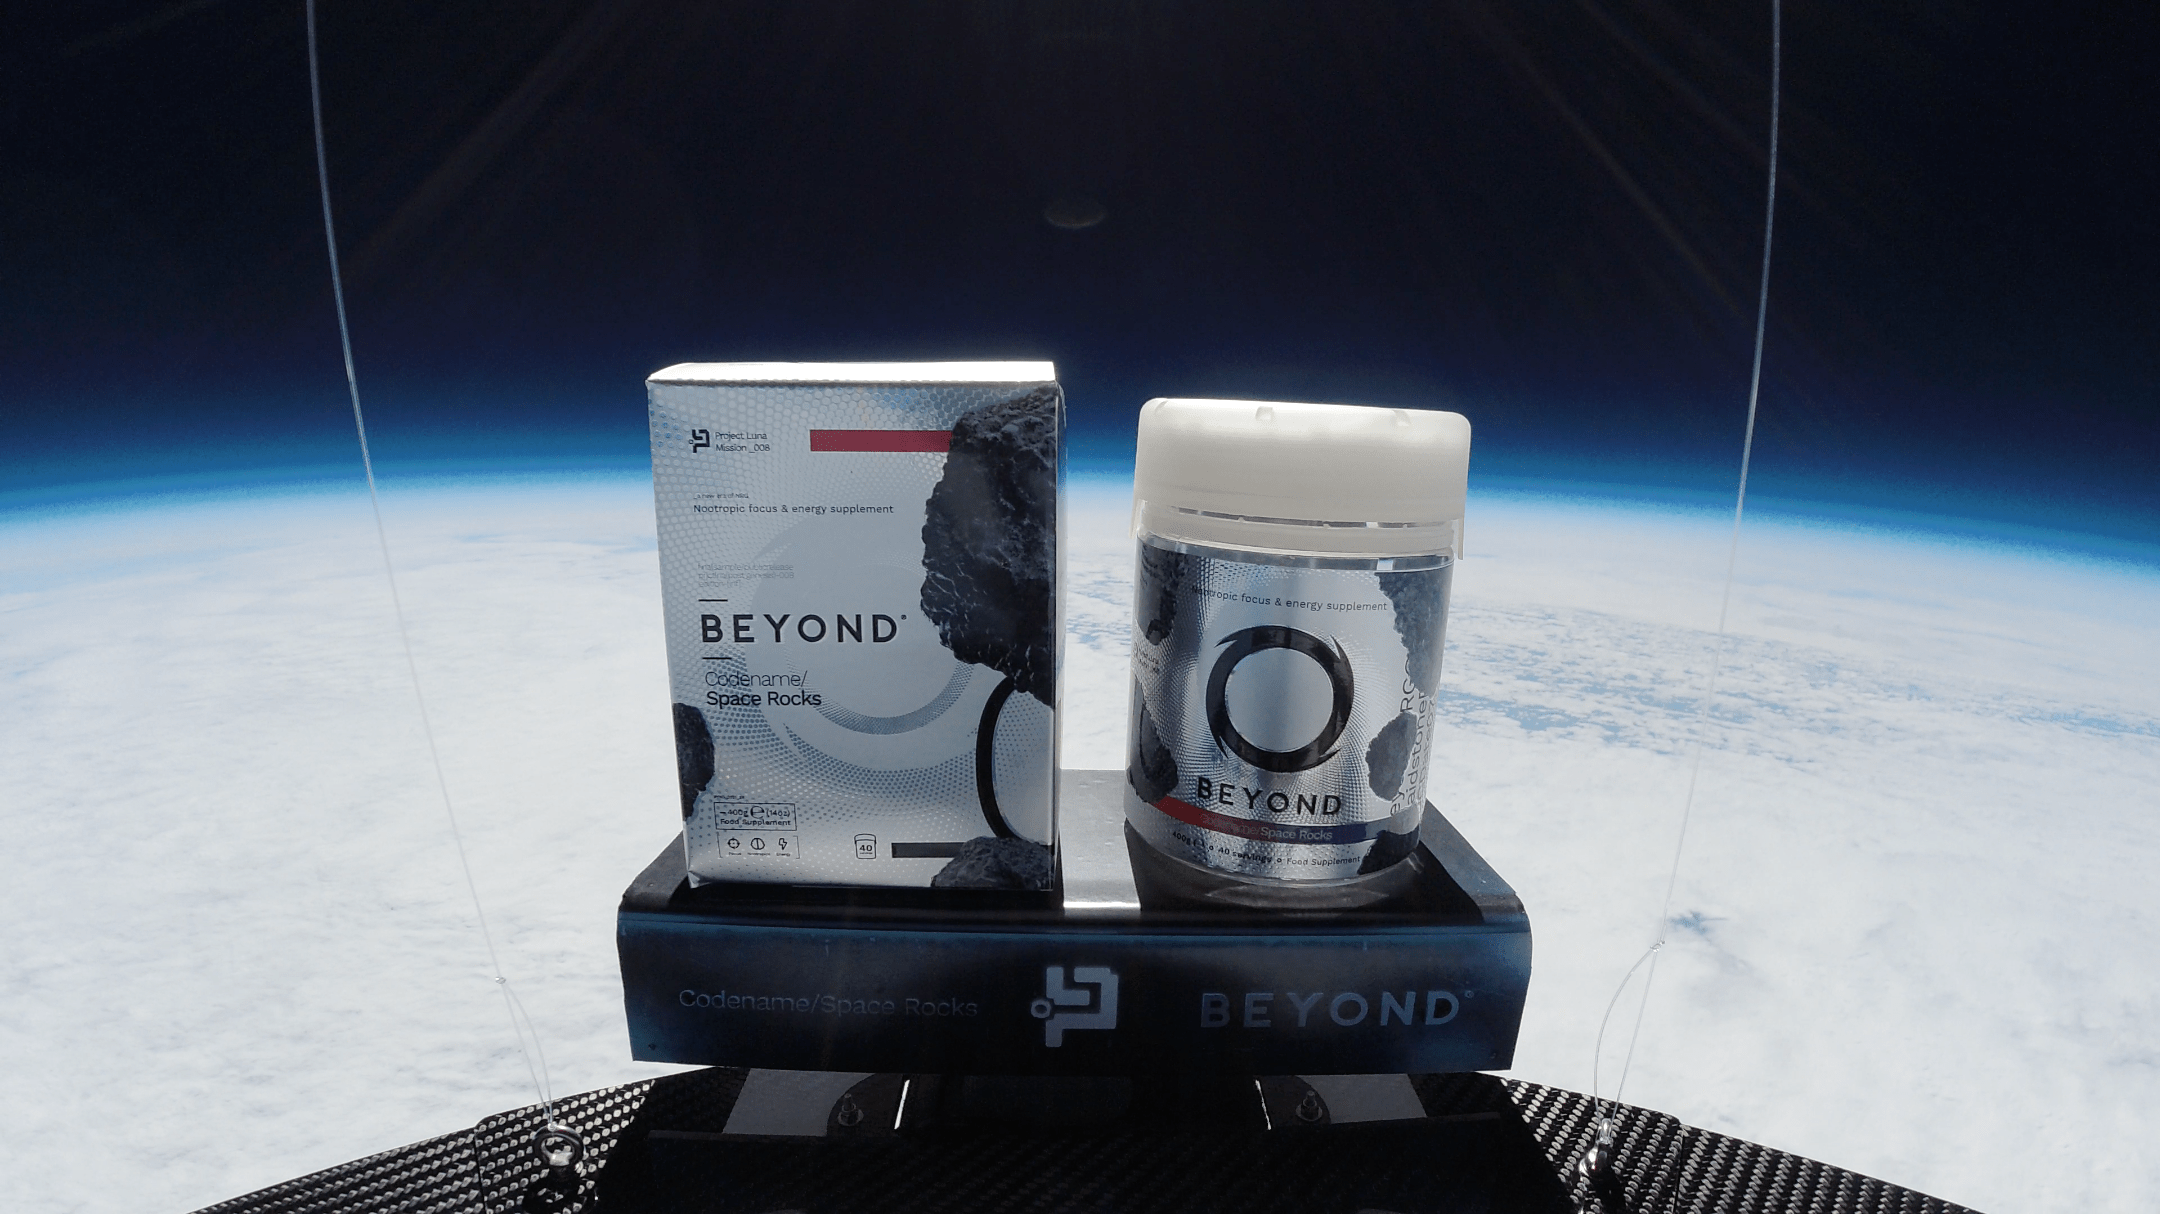 Beyond NRG from Infinity and Beyond with “Space Rocks”